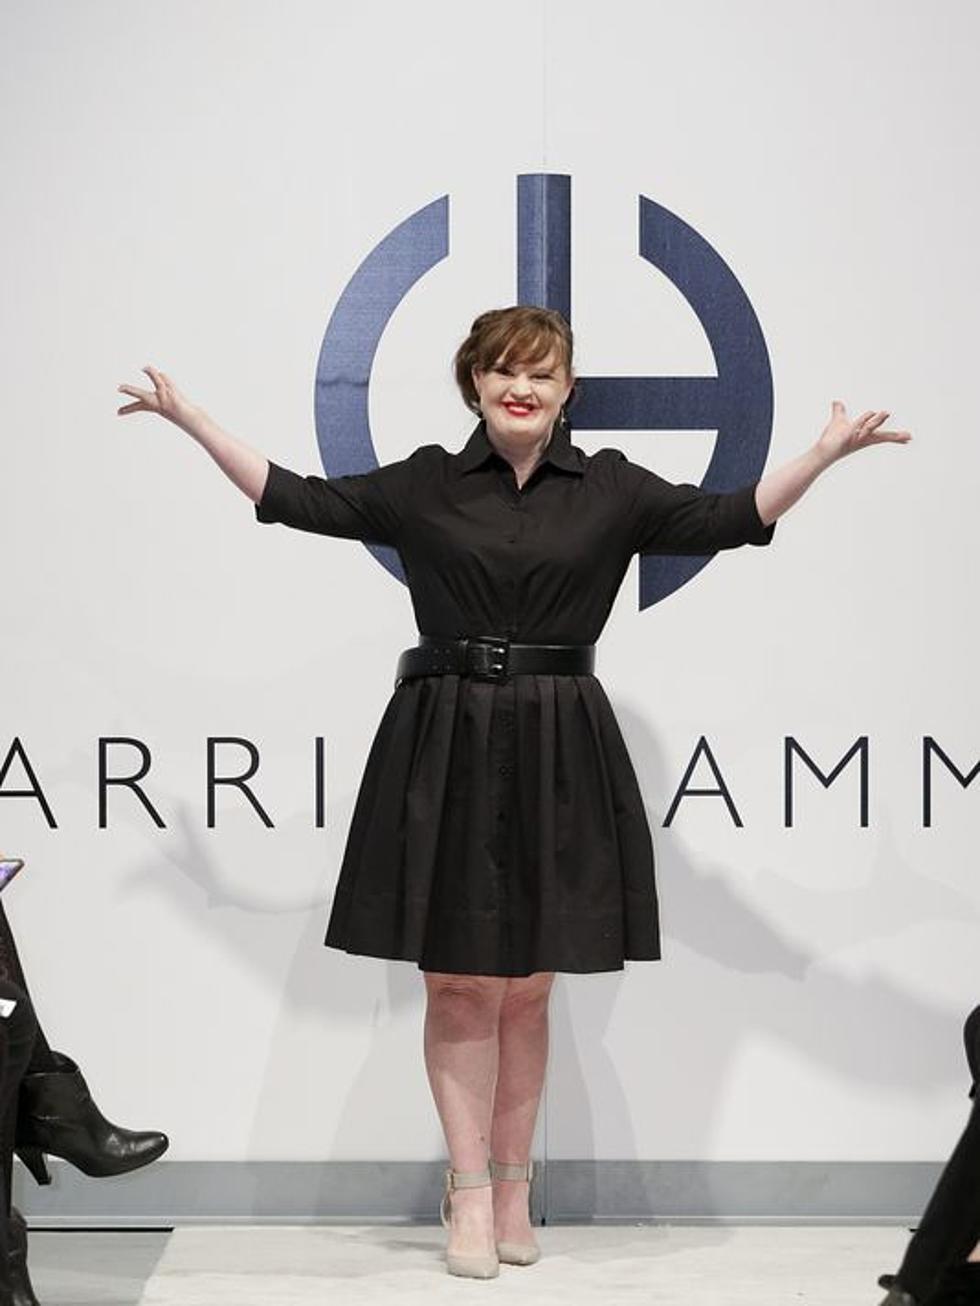 First Runway Model With Down Syndrome at NY Fashion Week [PHOTO]